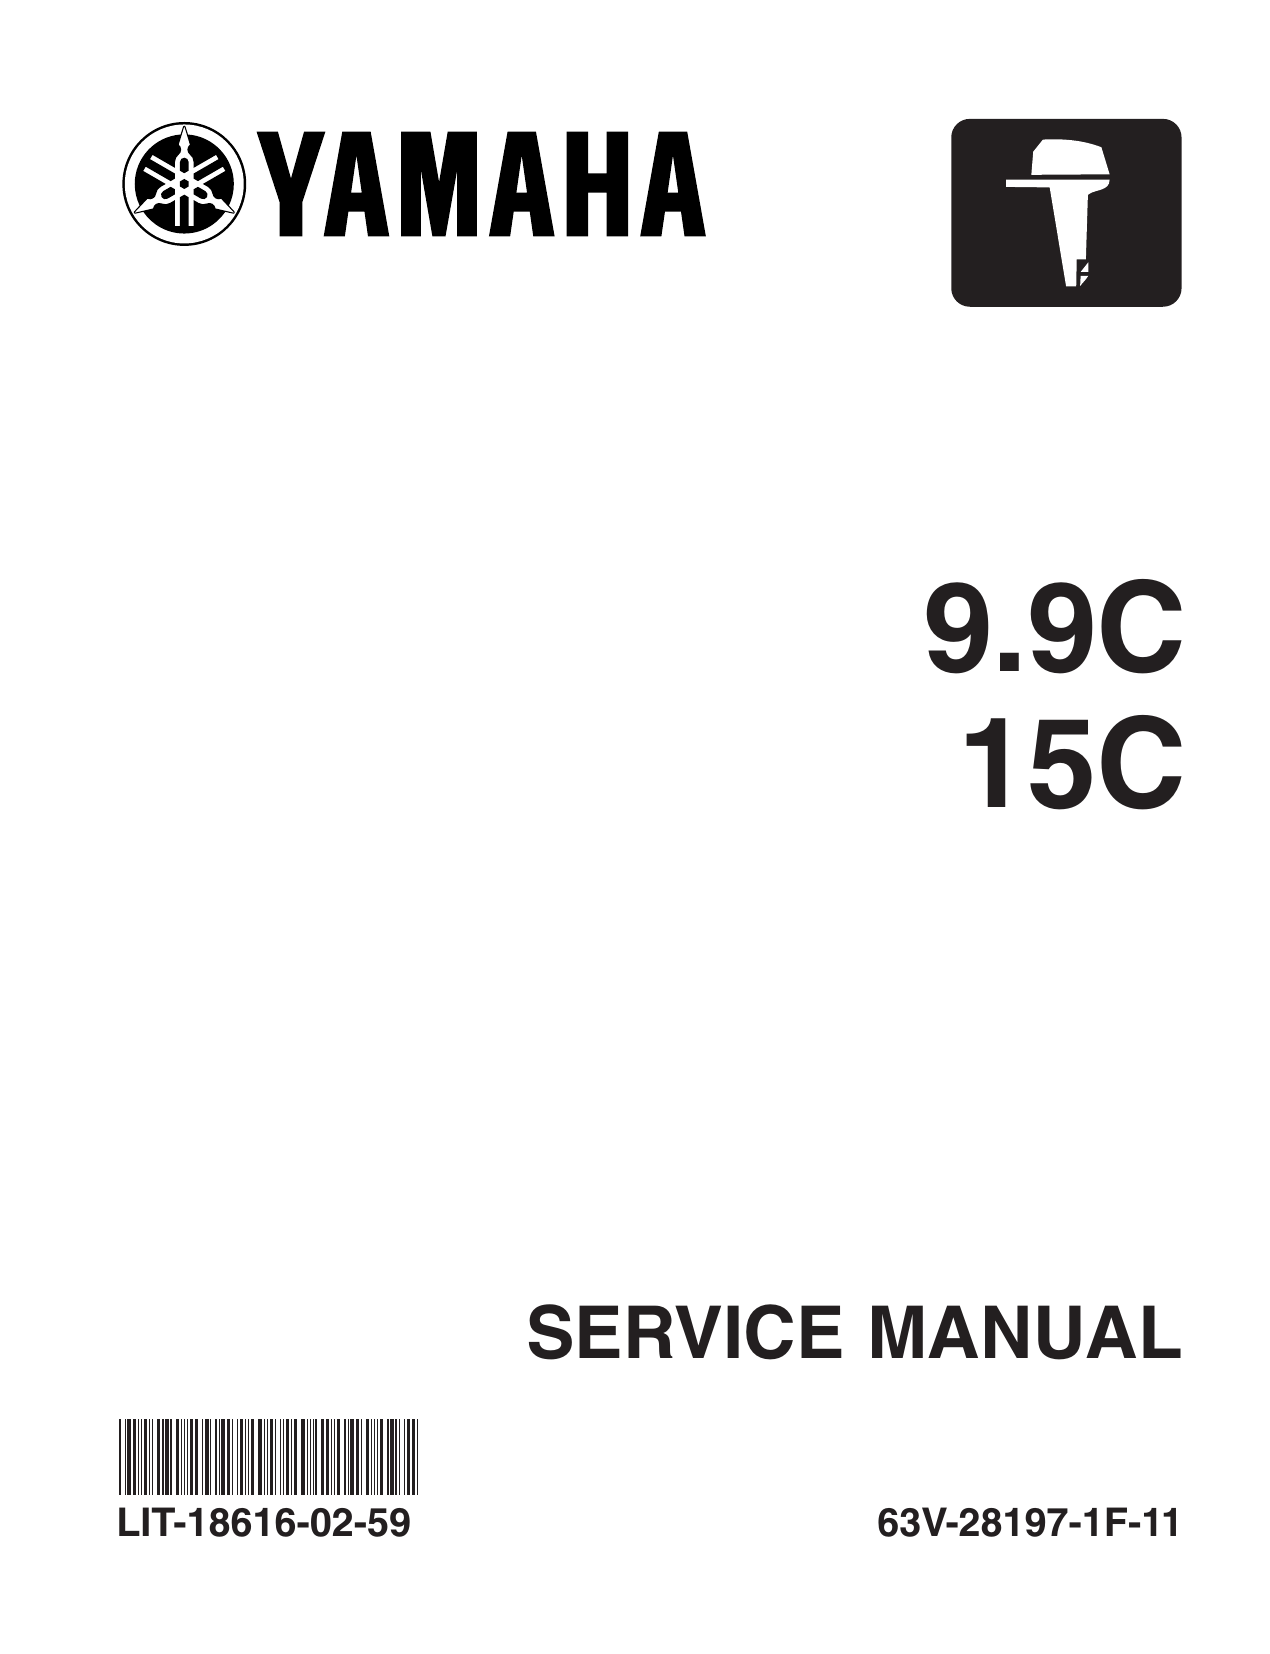 2005 Yamaha 9.9c, 15c outboard engine service manual Preview image 1